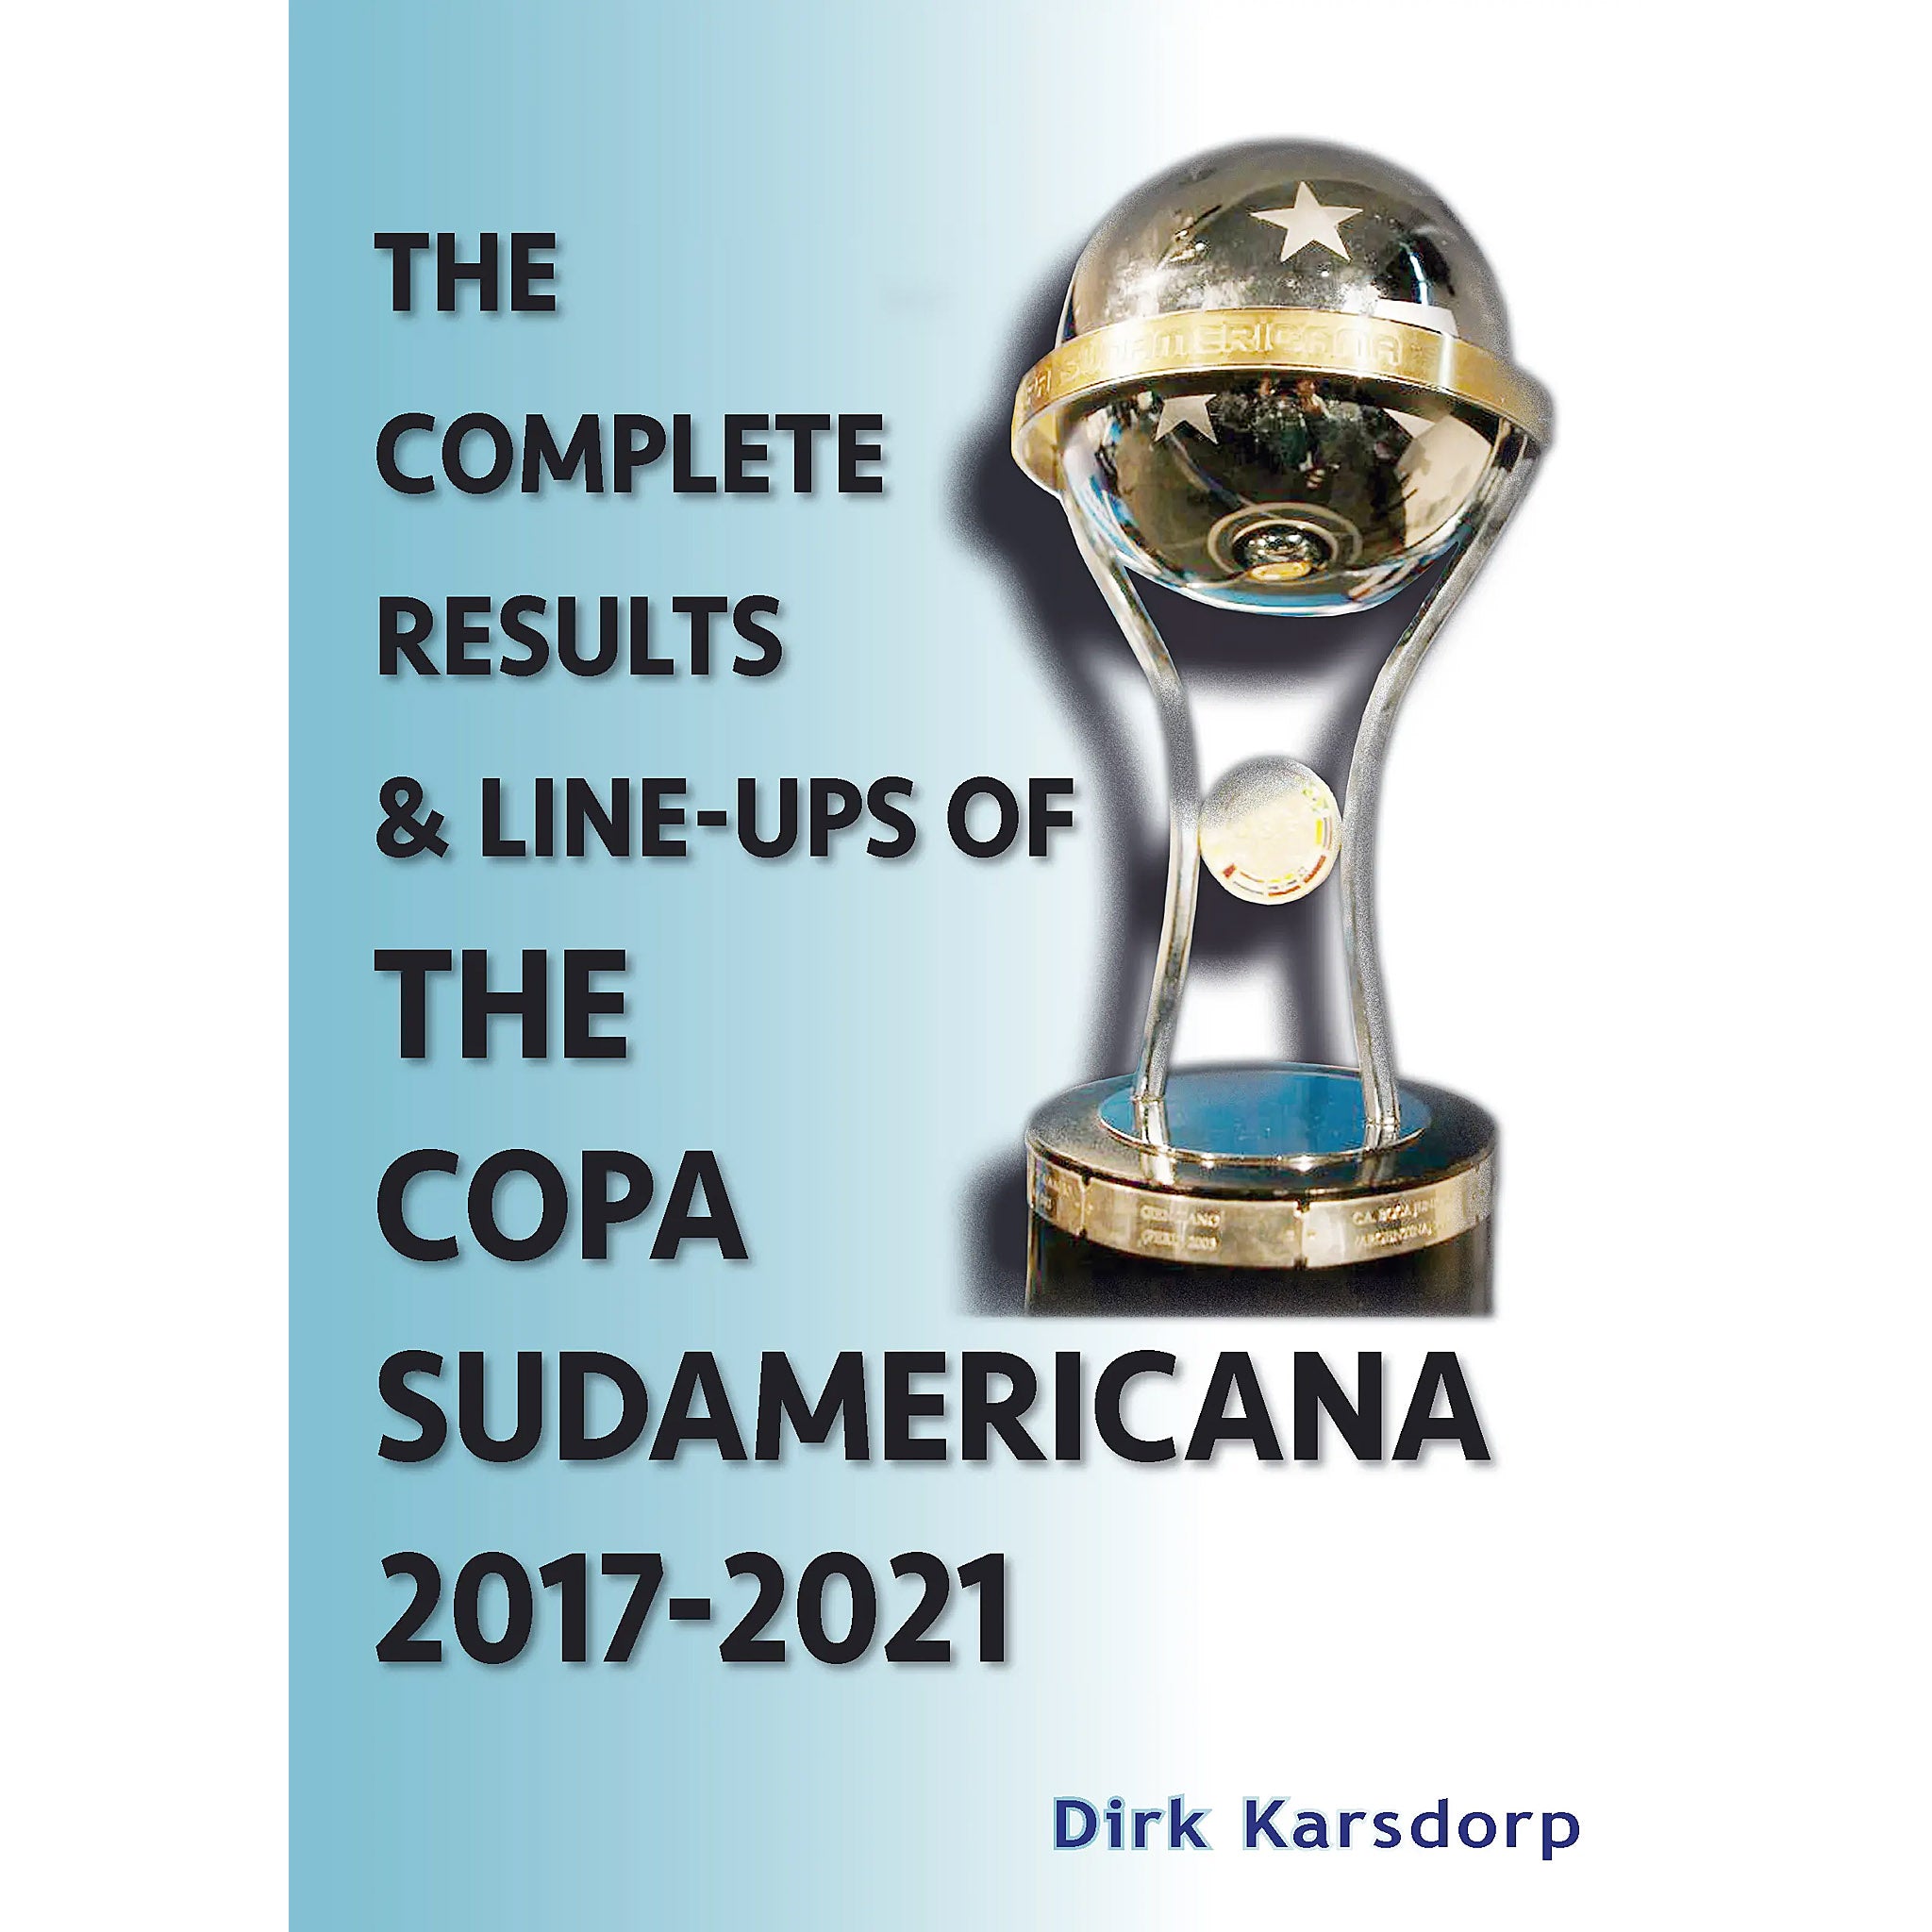 The Complete Results & Line-ups of the Copa Sudamericana 2017-2021